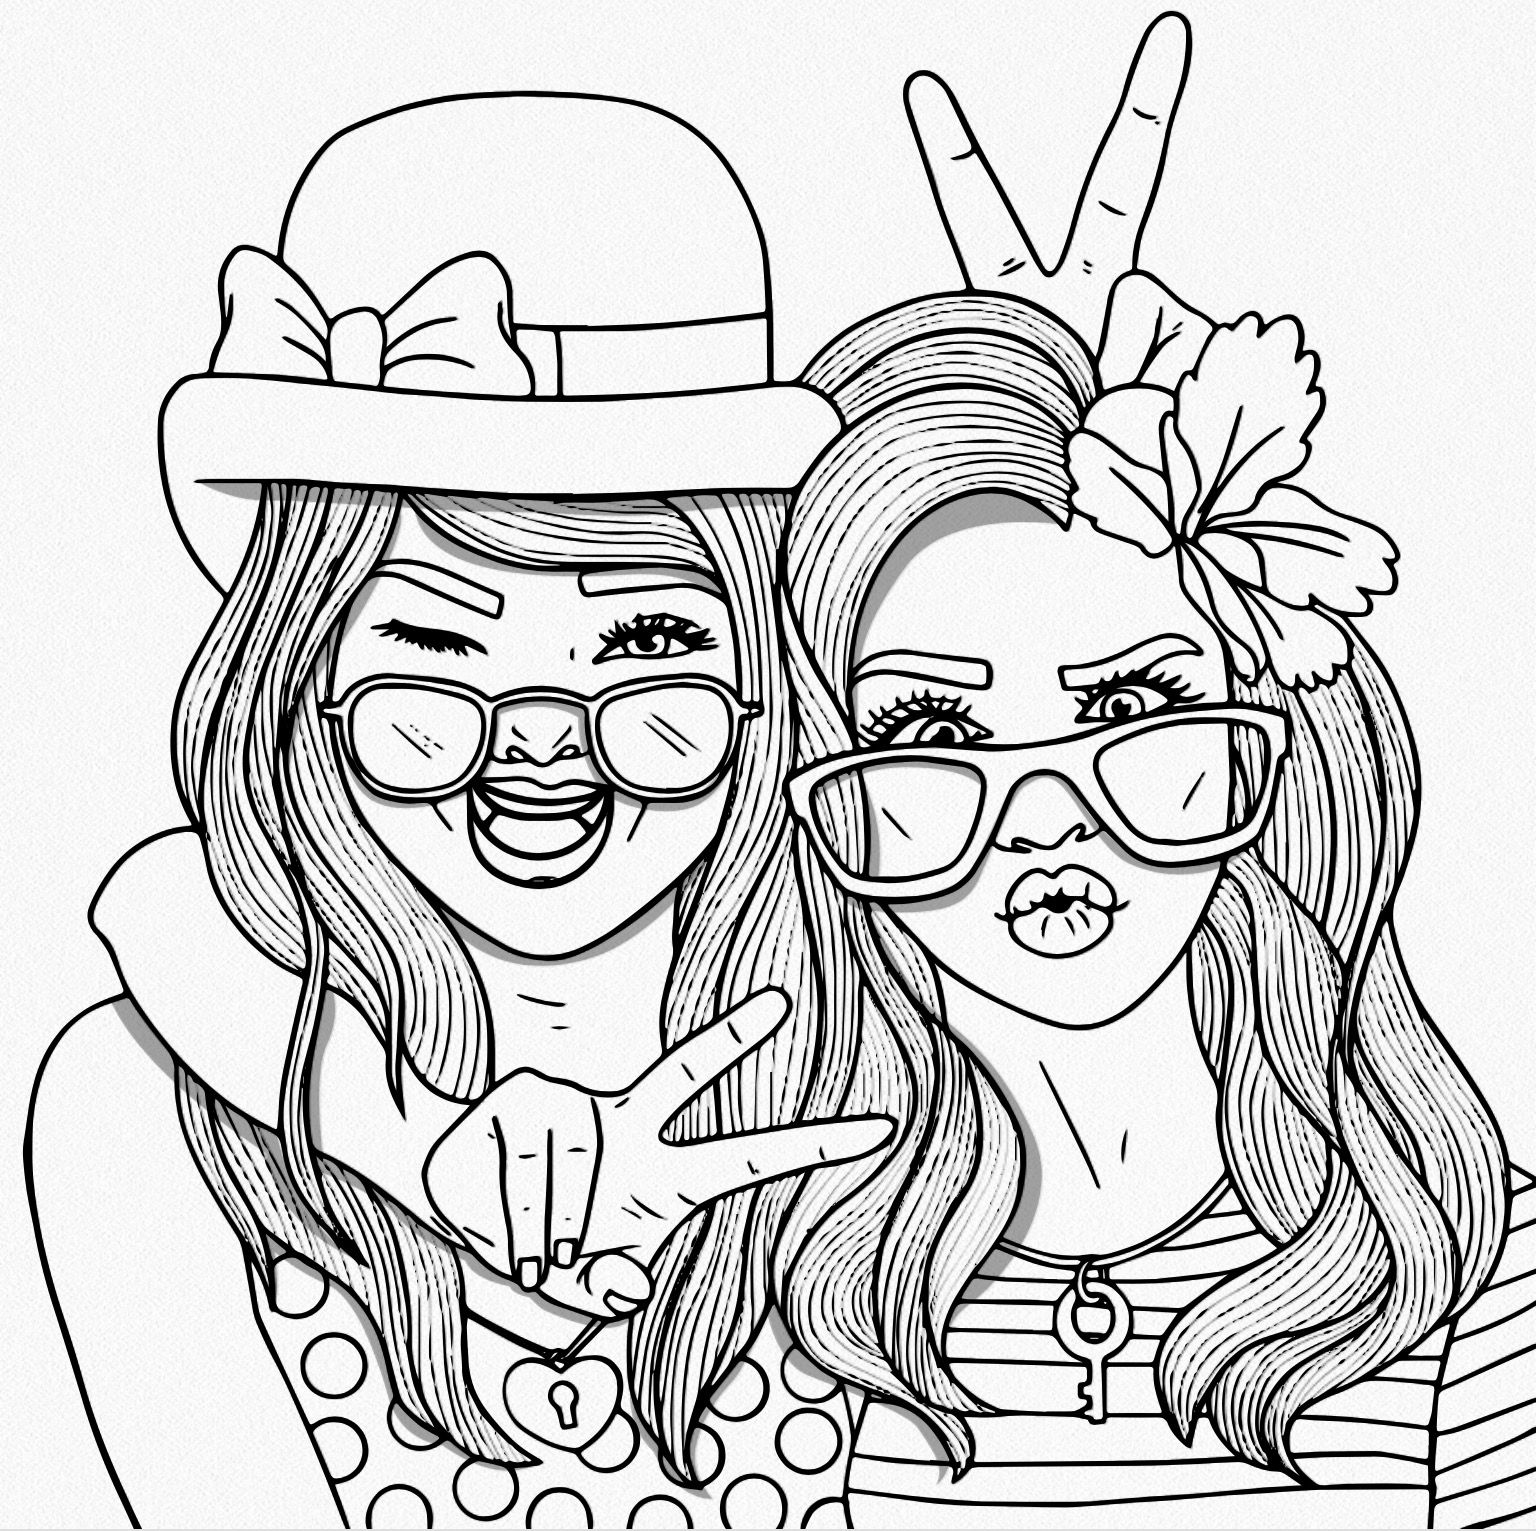 Bestie People Coloring Page Cute Cool Sheets To Print Free Out For